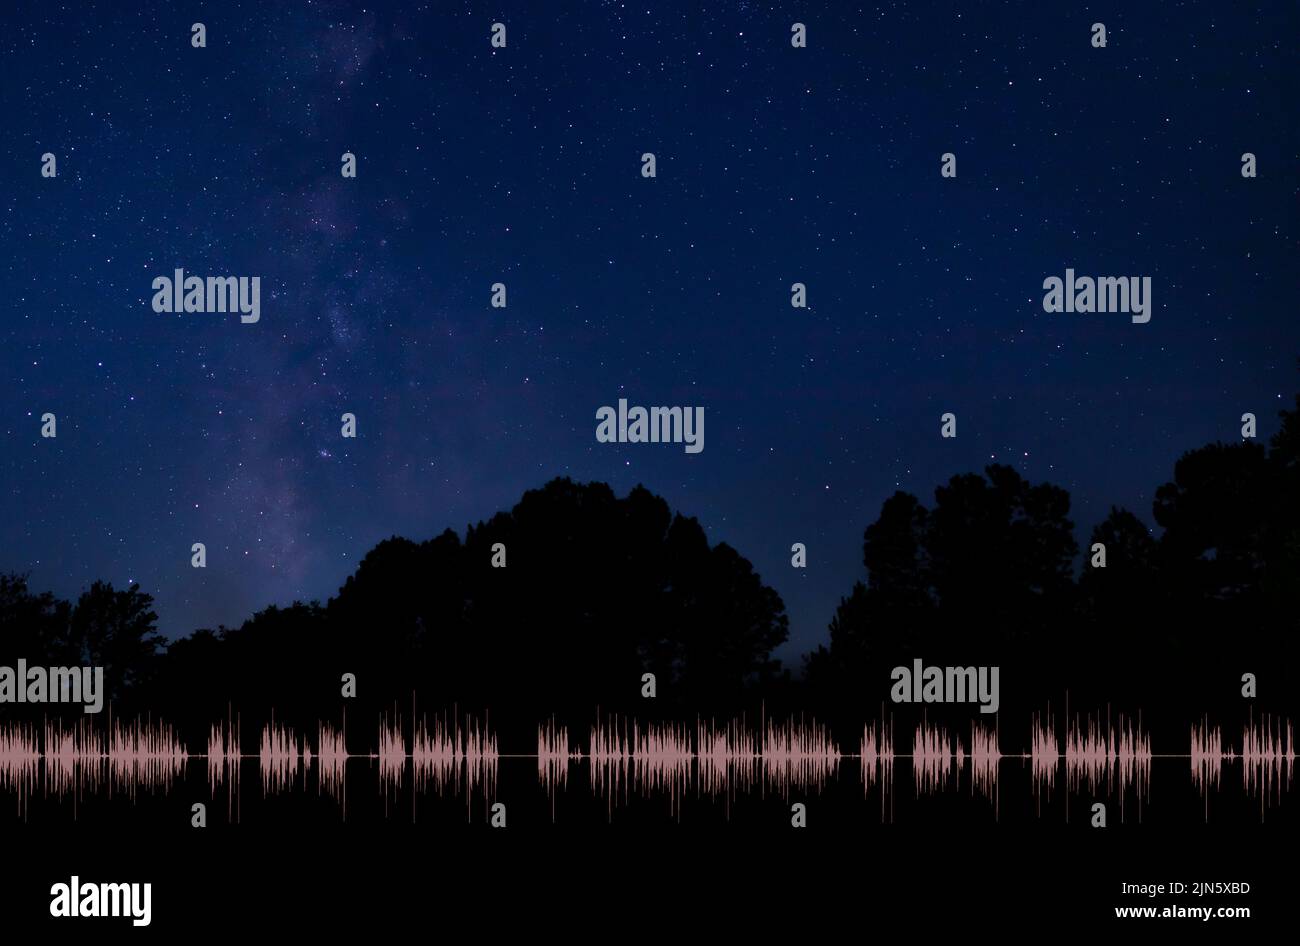 Radio signal in the night with a sky filled with stars and the Milky Way Stock Photo